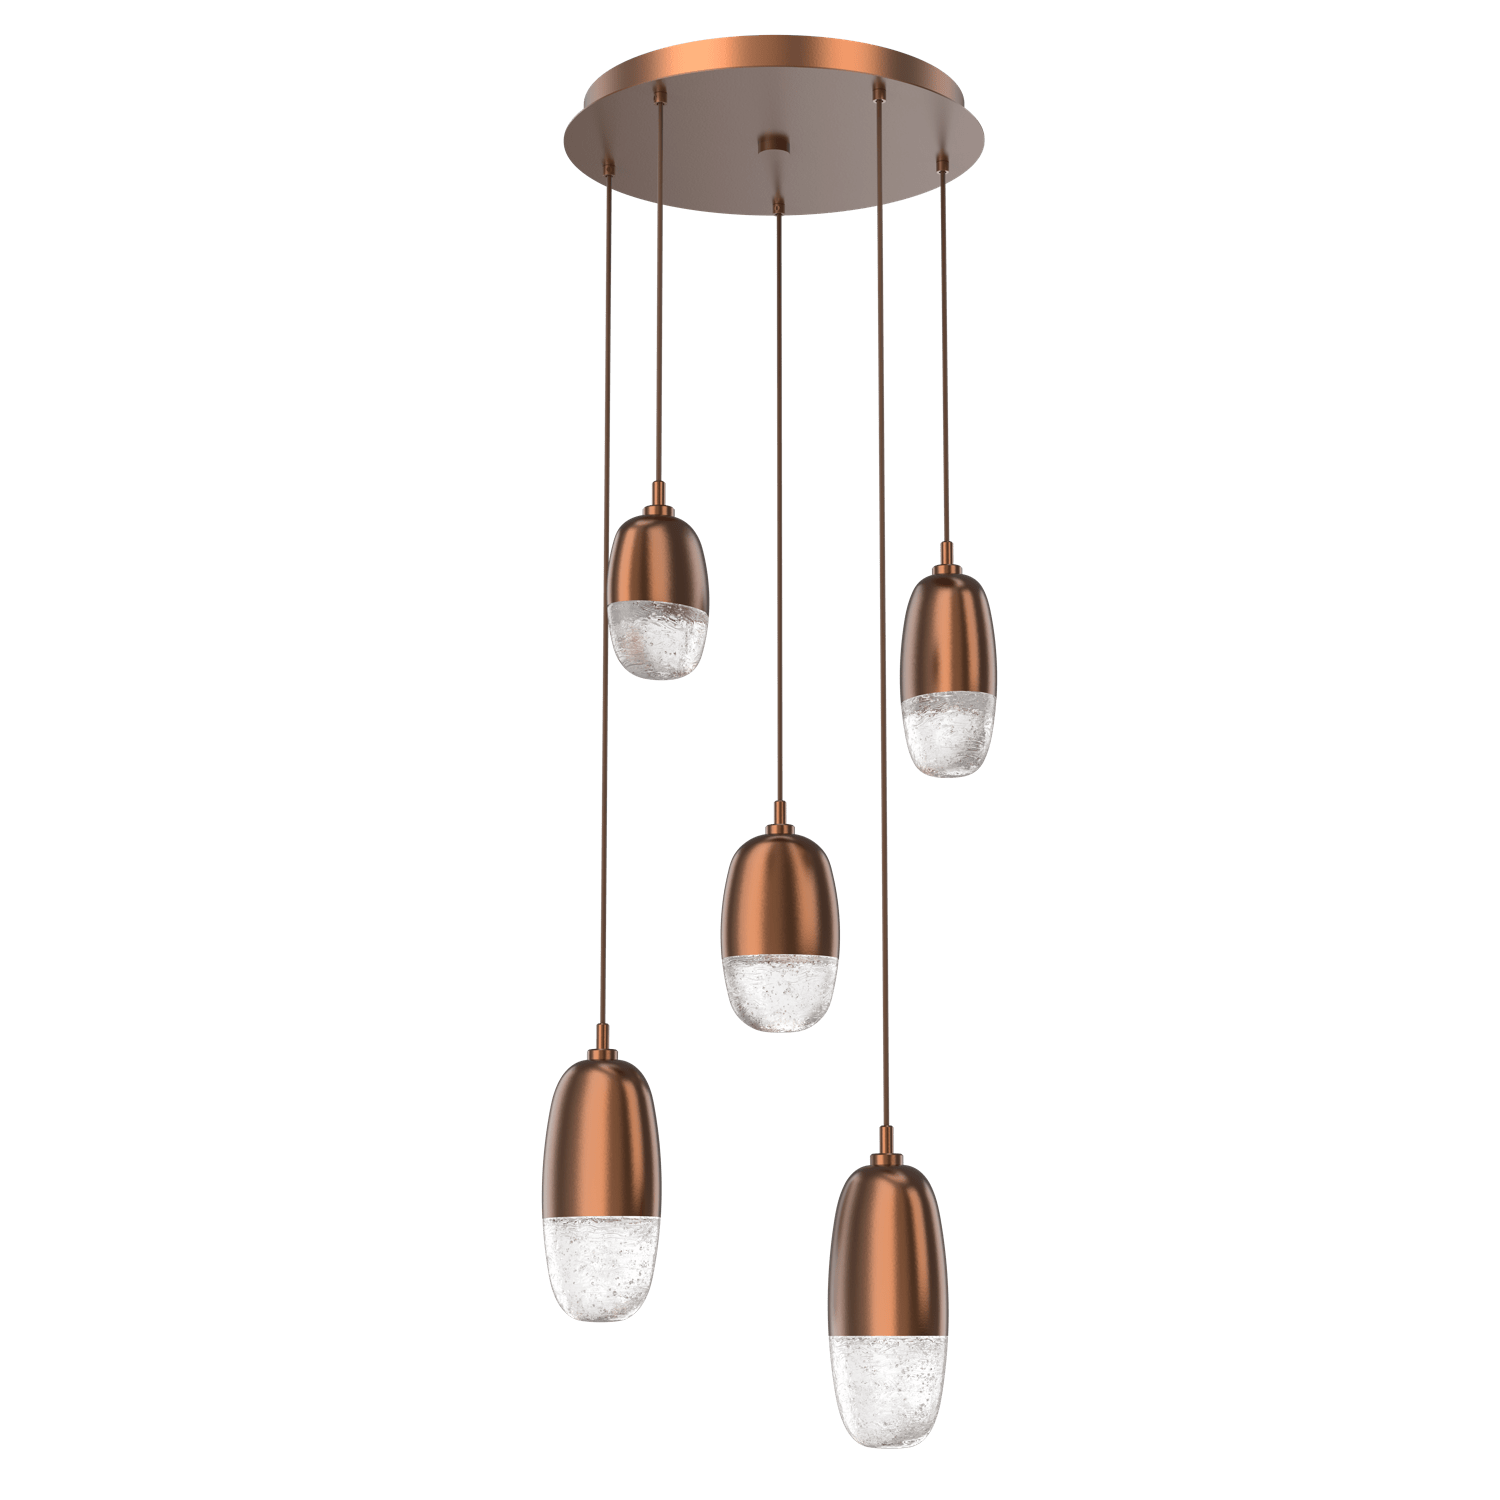 CHB0079-05-BB-Hammerton-Studio-Pebble-5-light-round-pendant-chandelier-with-burnished-bronze-finish-and-clear-cast-glass-shades-and-LED-lamping